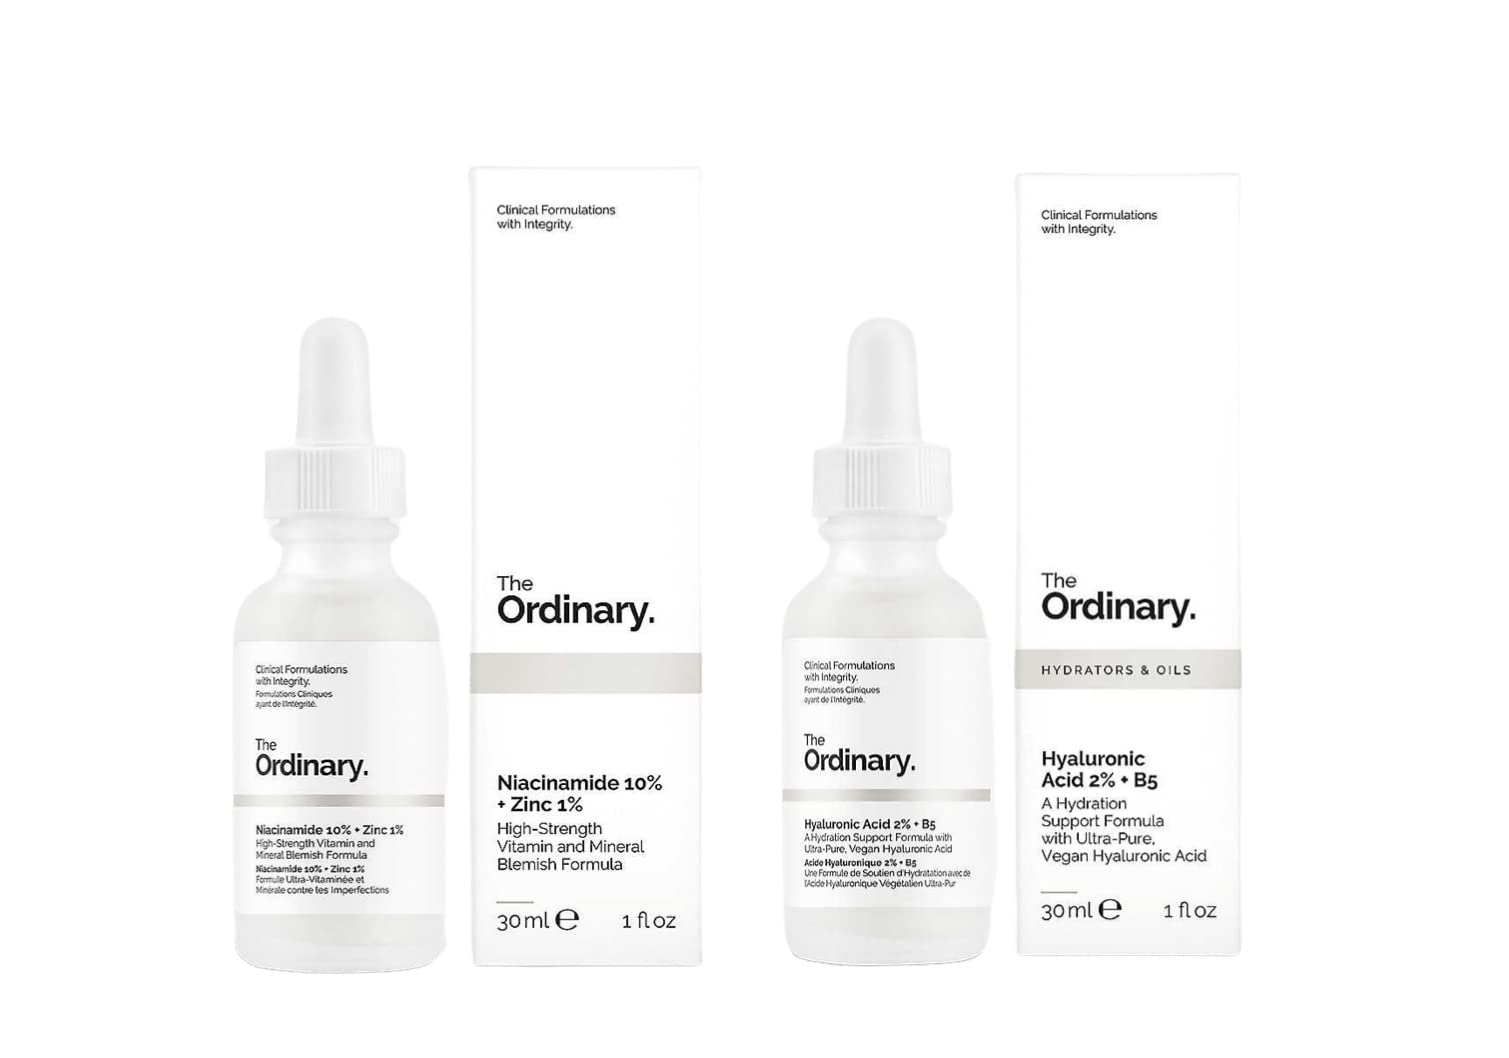 The Ordinary Hyaluronic Acid with 2% + B5 (30ml) and Niacinamide 10% + Zinc 1% (30ml) Bundle Face Care Set